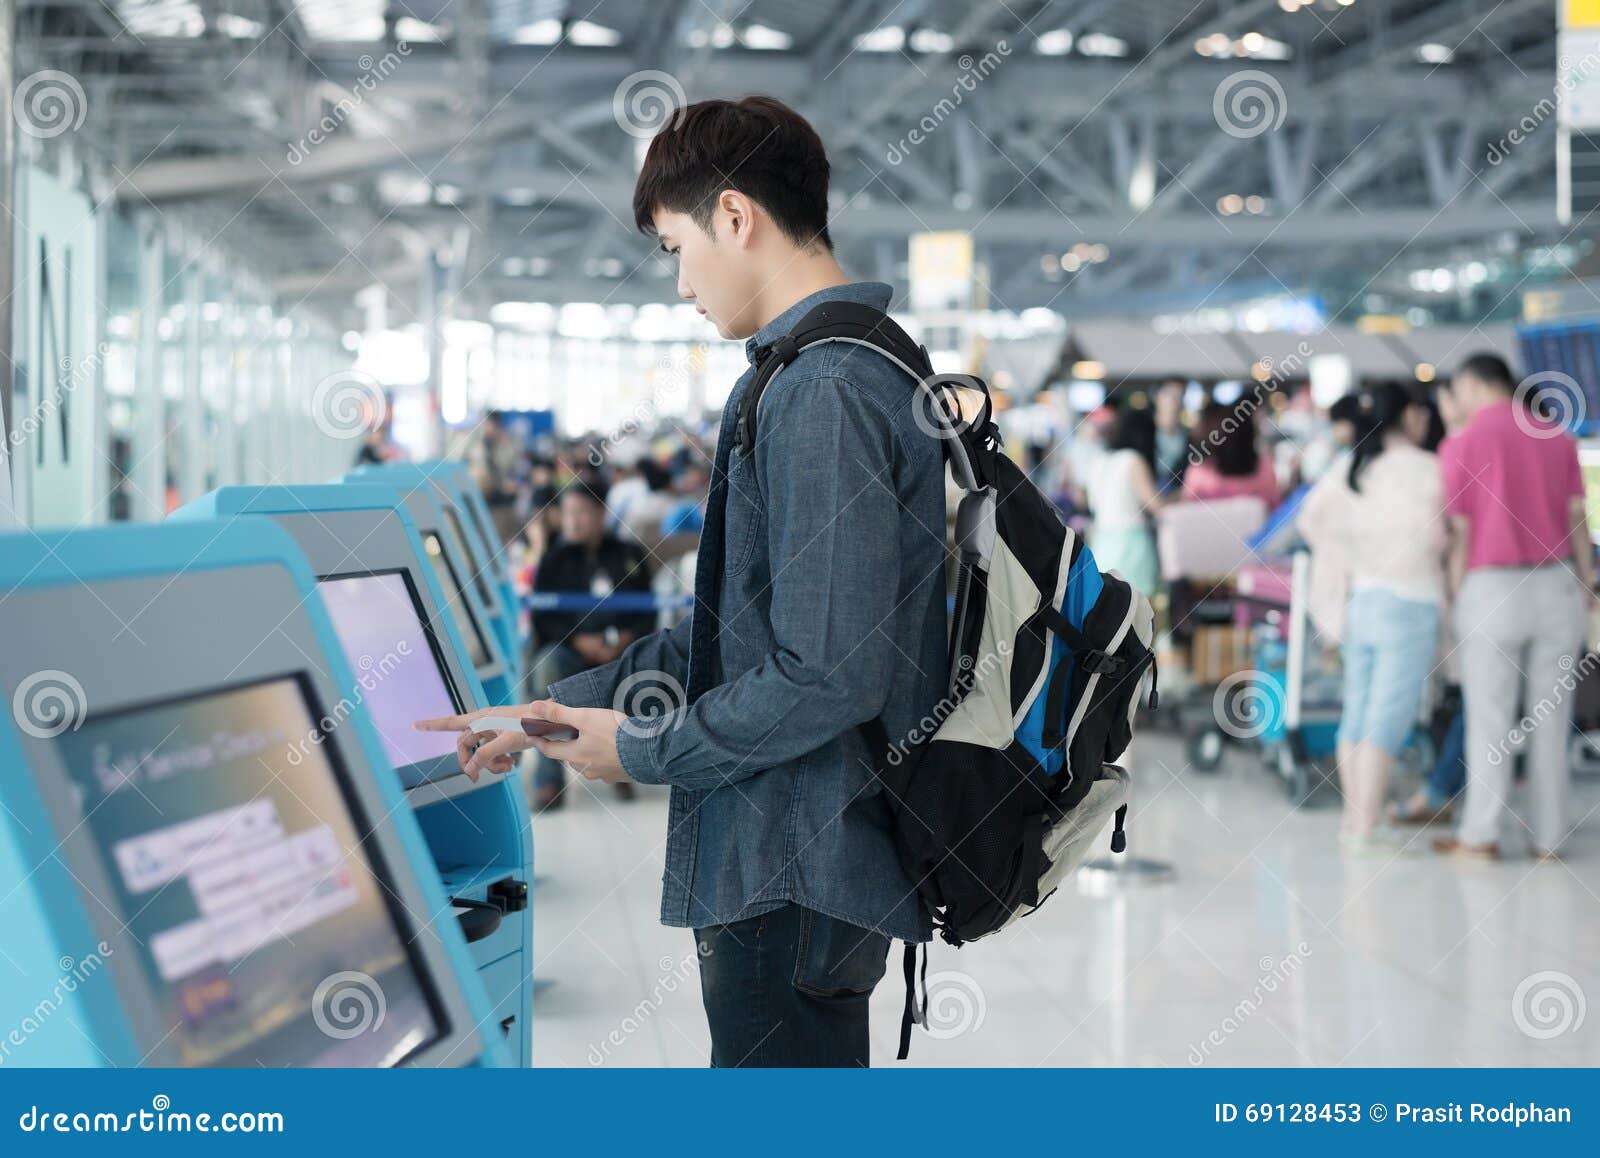 young asian man using self check-in kiosks in airport